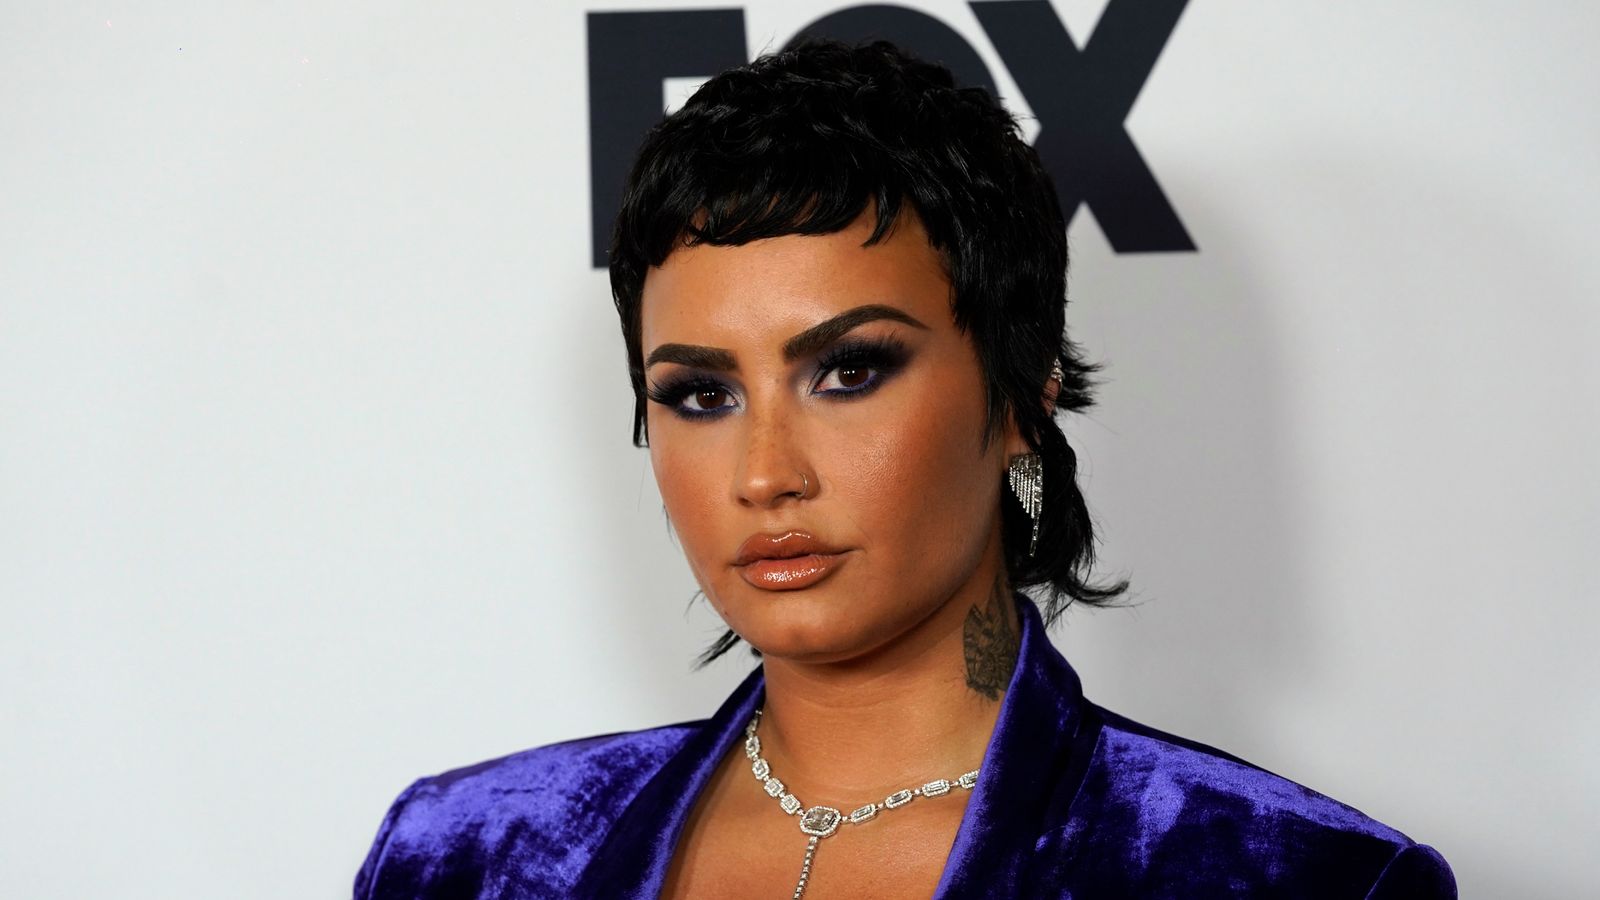 Demi Lovato says it's okay that people mistakenly mis-gender them - as long  as they try to get it right | Ents & Arts News | Sky News